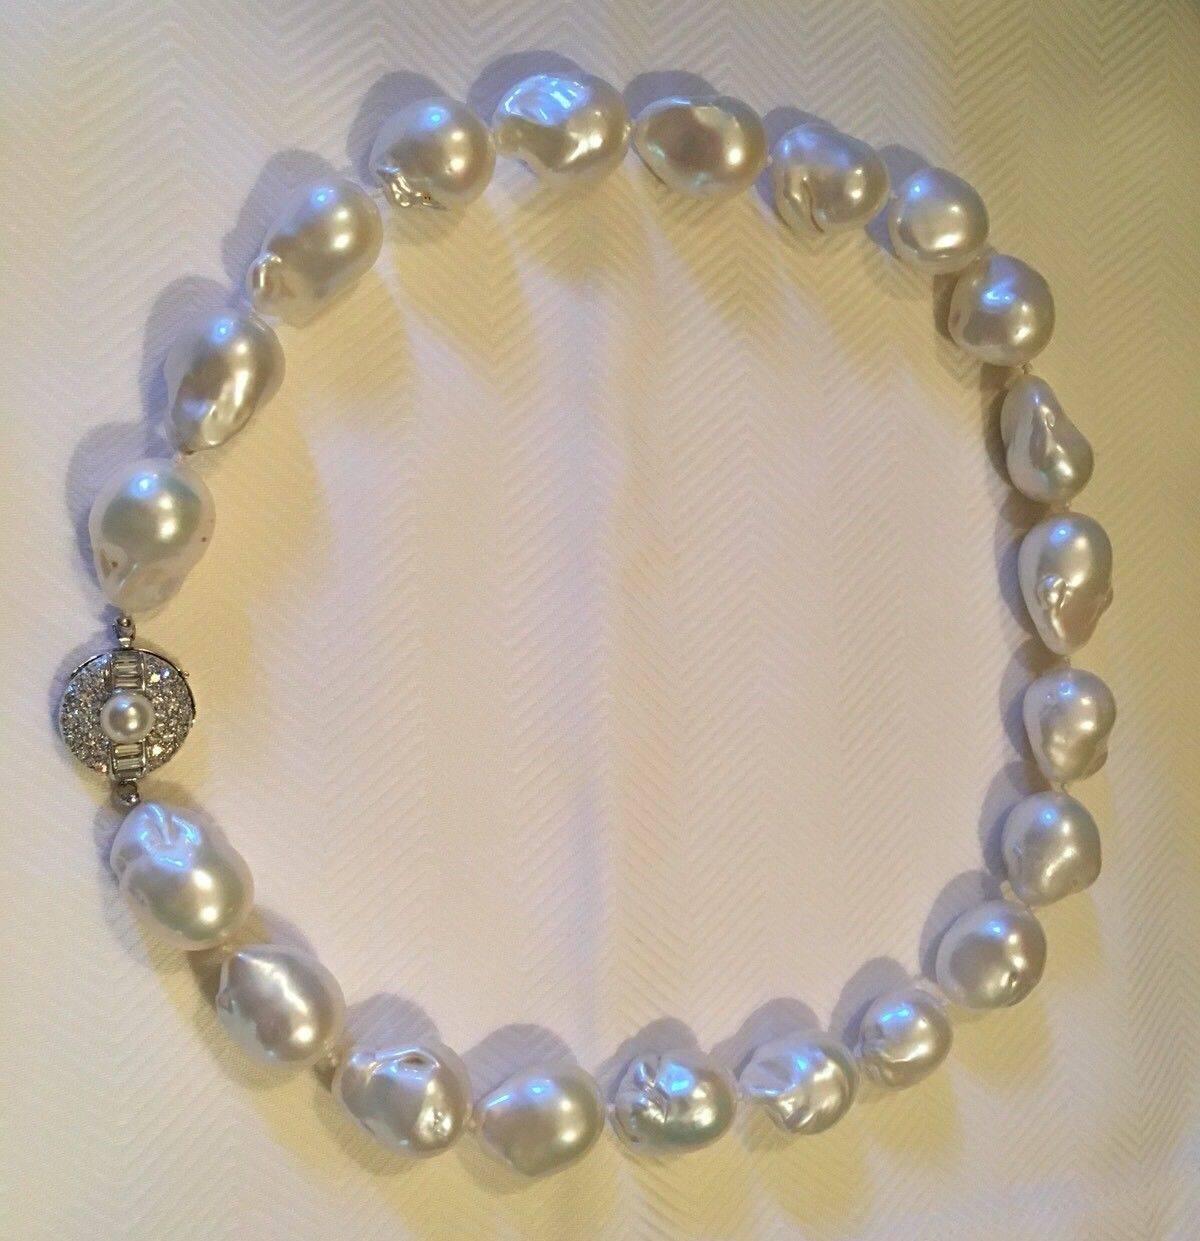 This gorgeous fine high quality cultured baroque pearl necklace measures 22